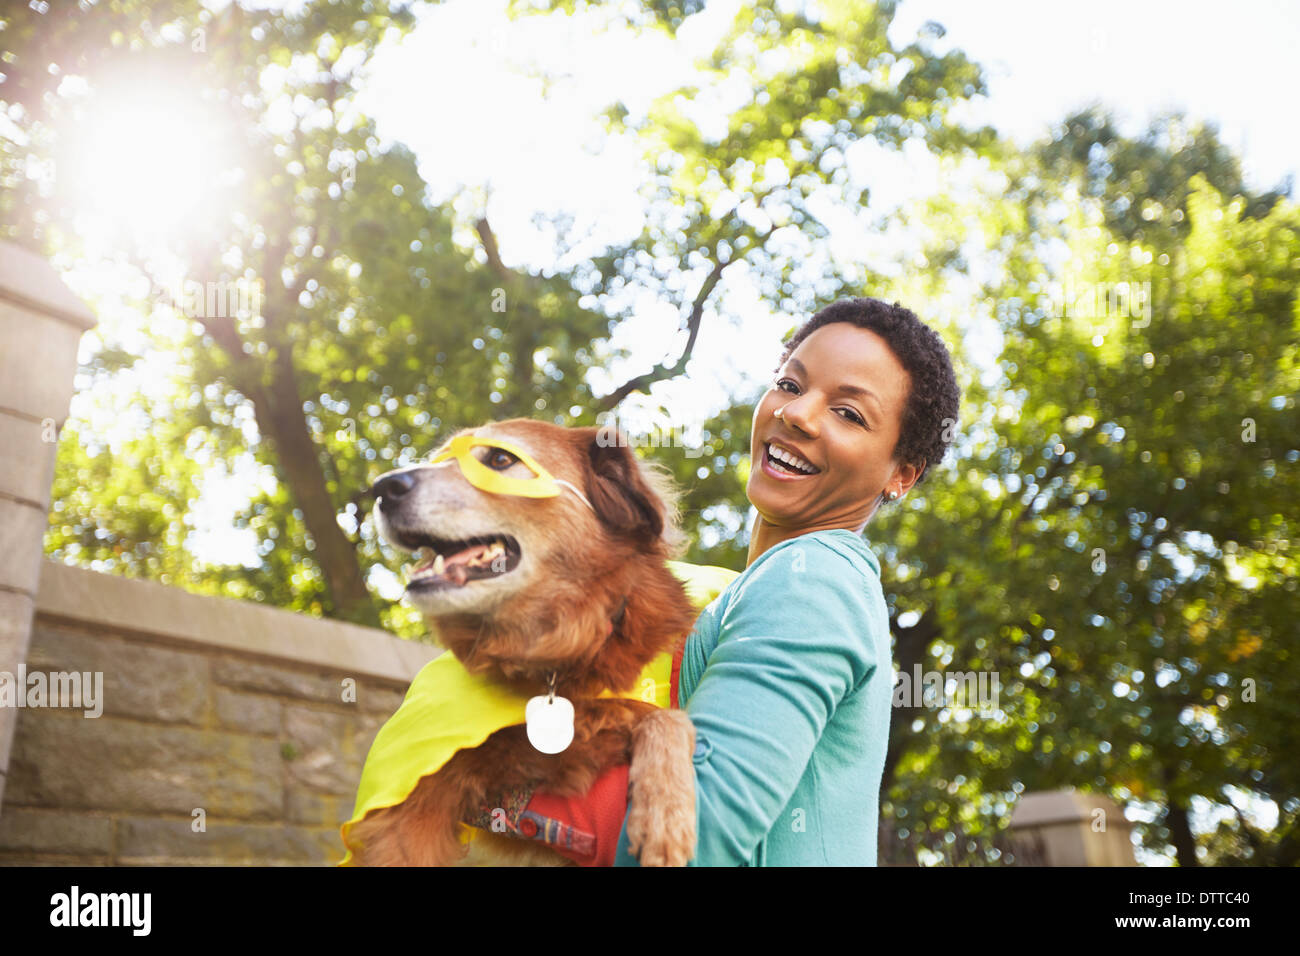 Black woman carrying costumed dog in park Stock Photo